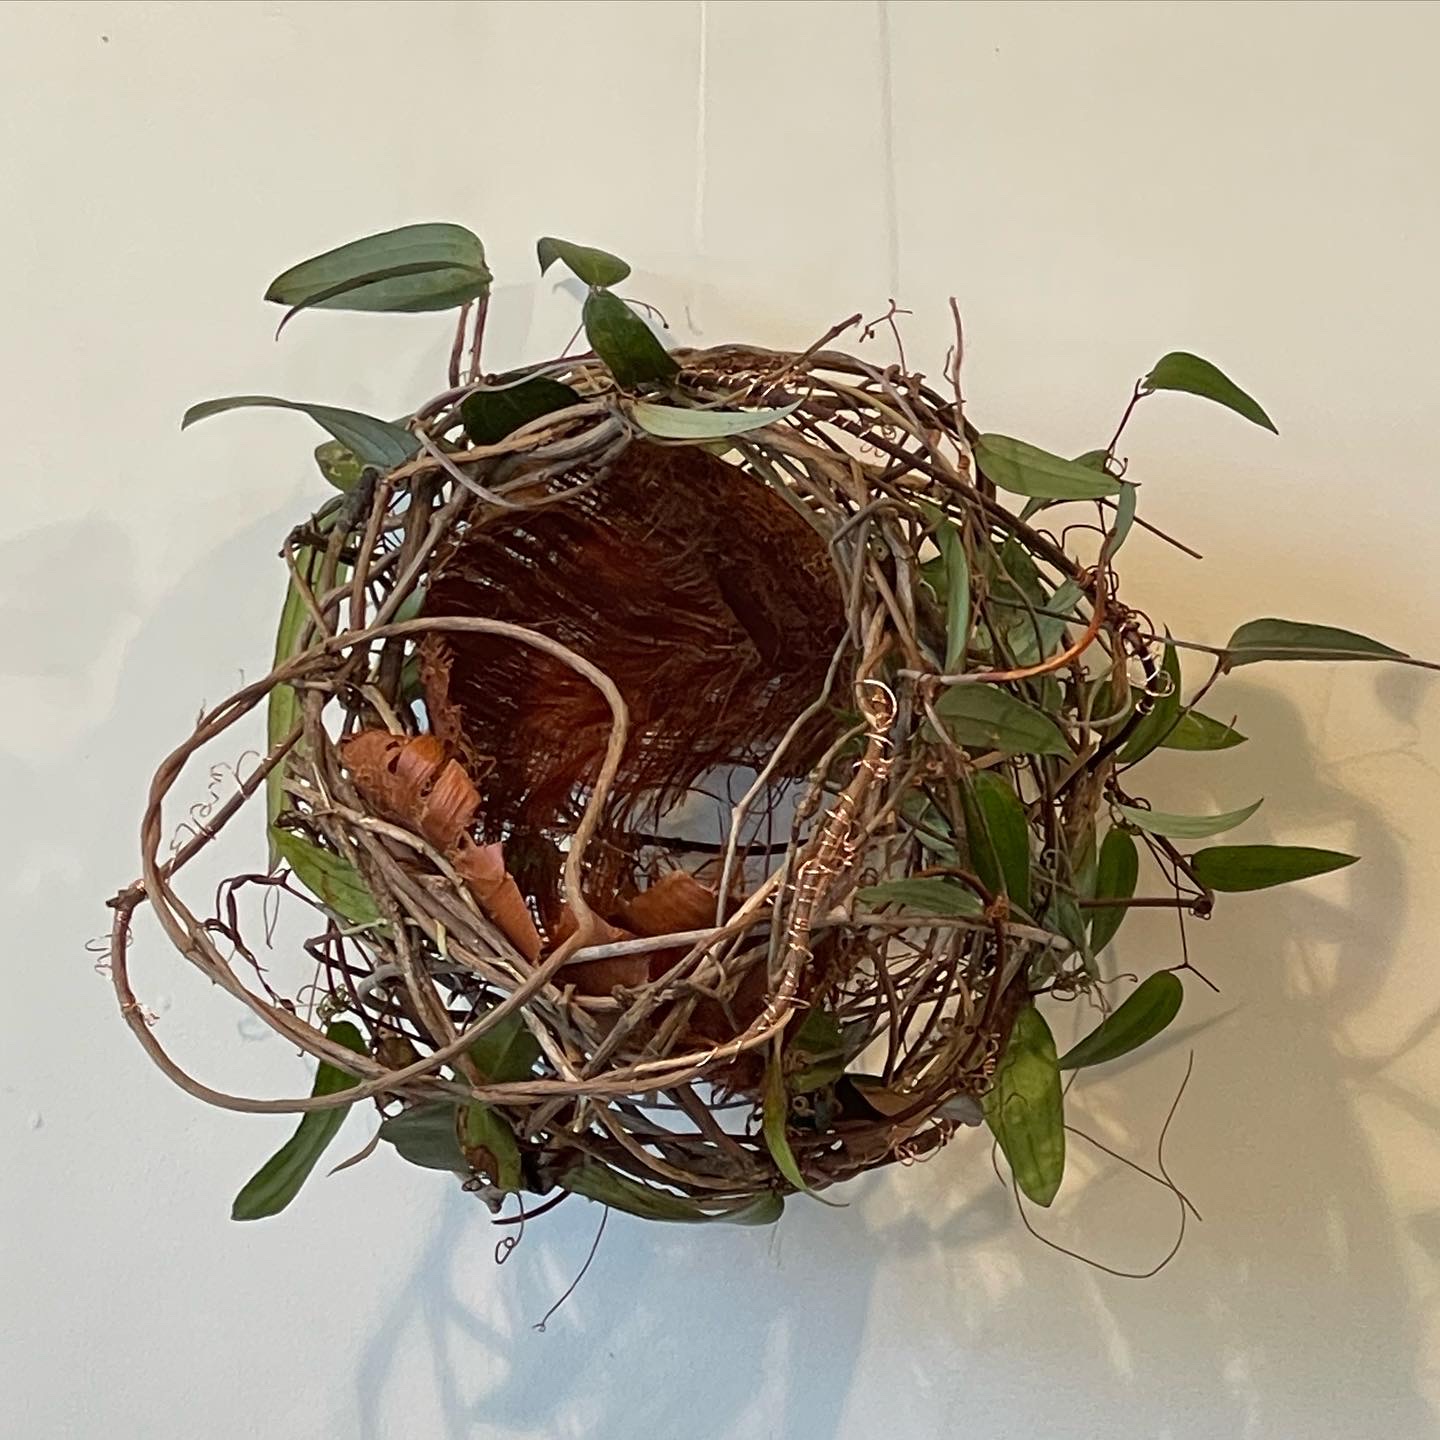 Woven basket with leaves by sculptural baskery artist Catriona Pollard.